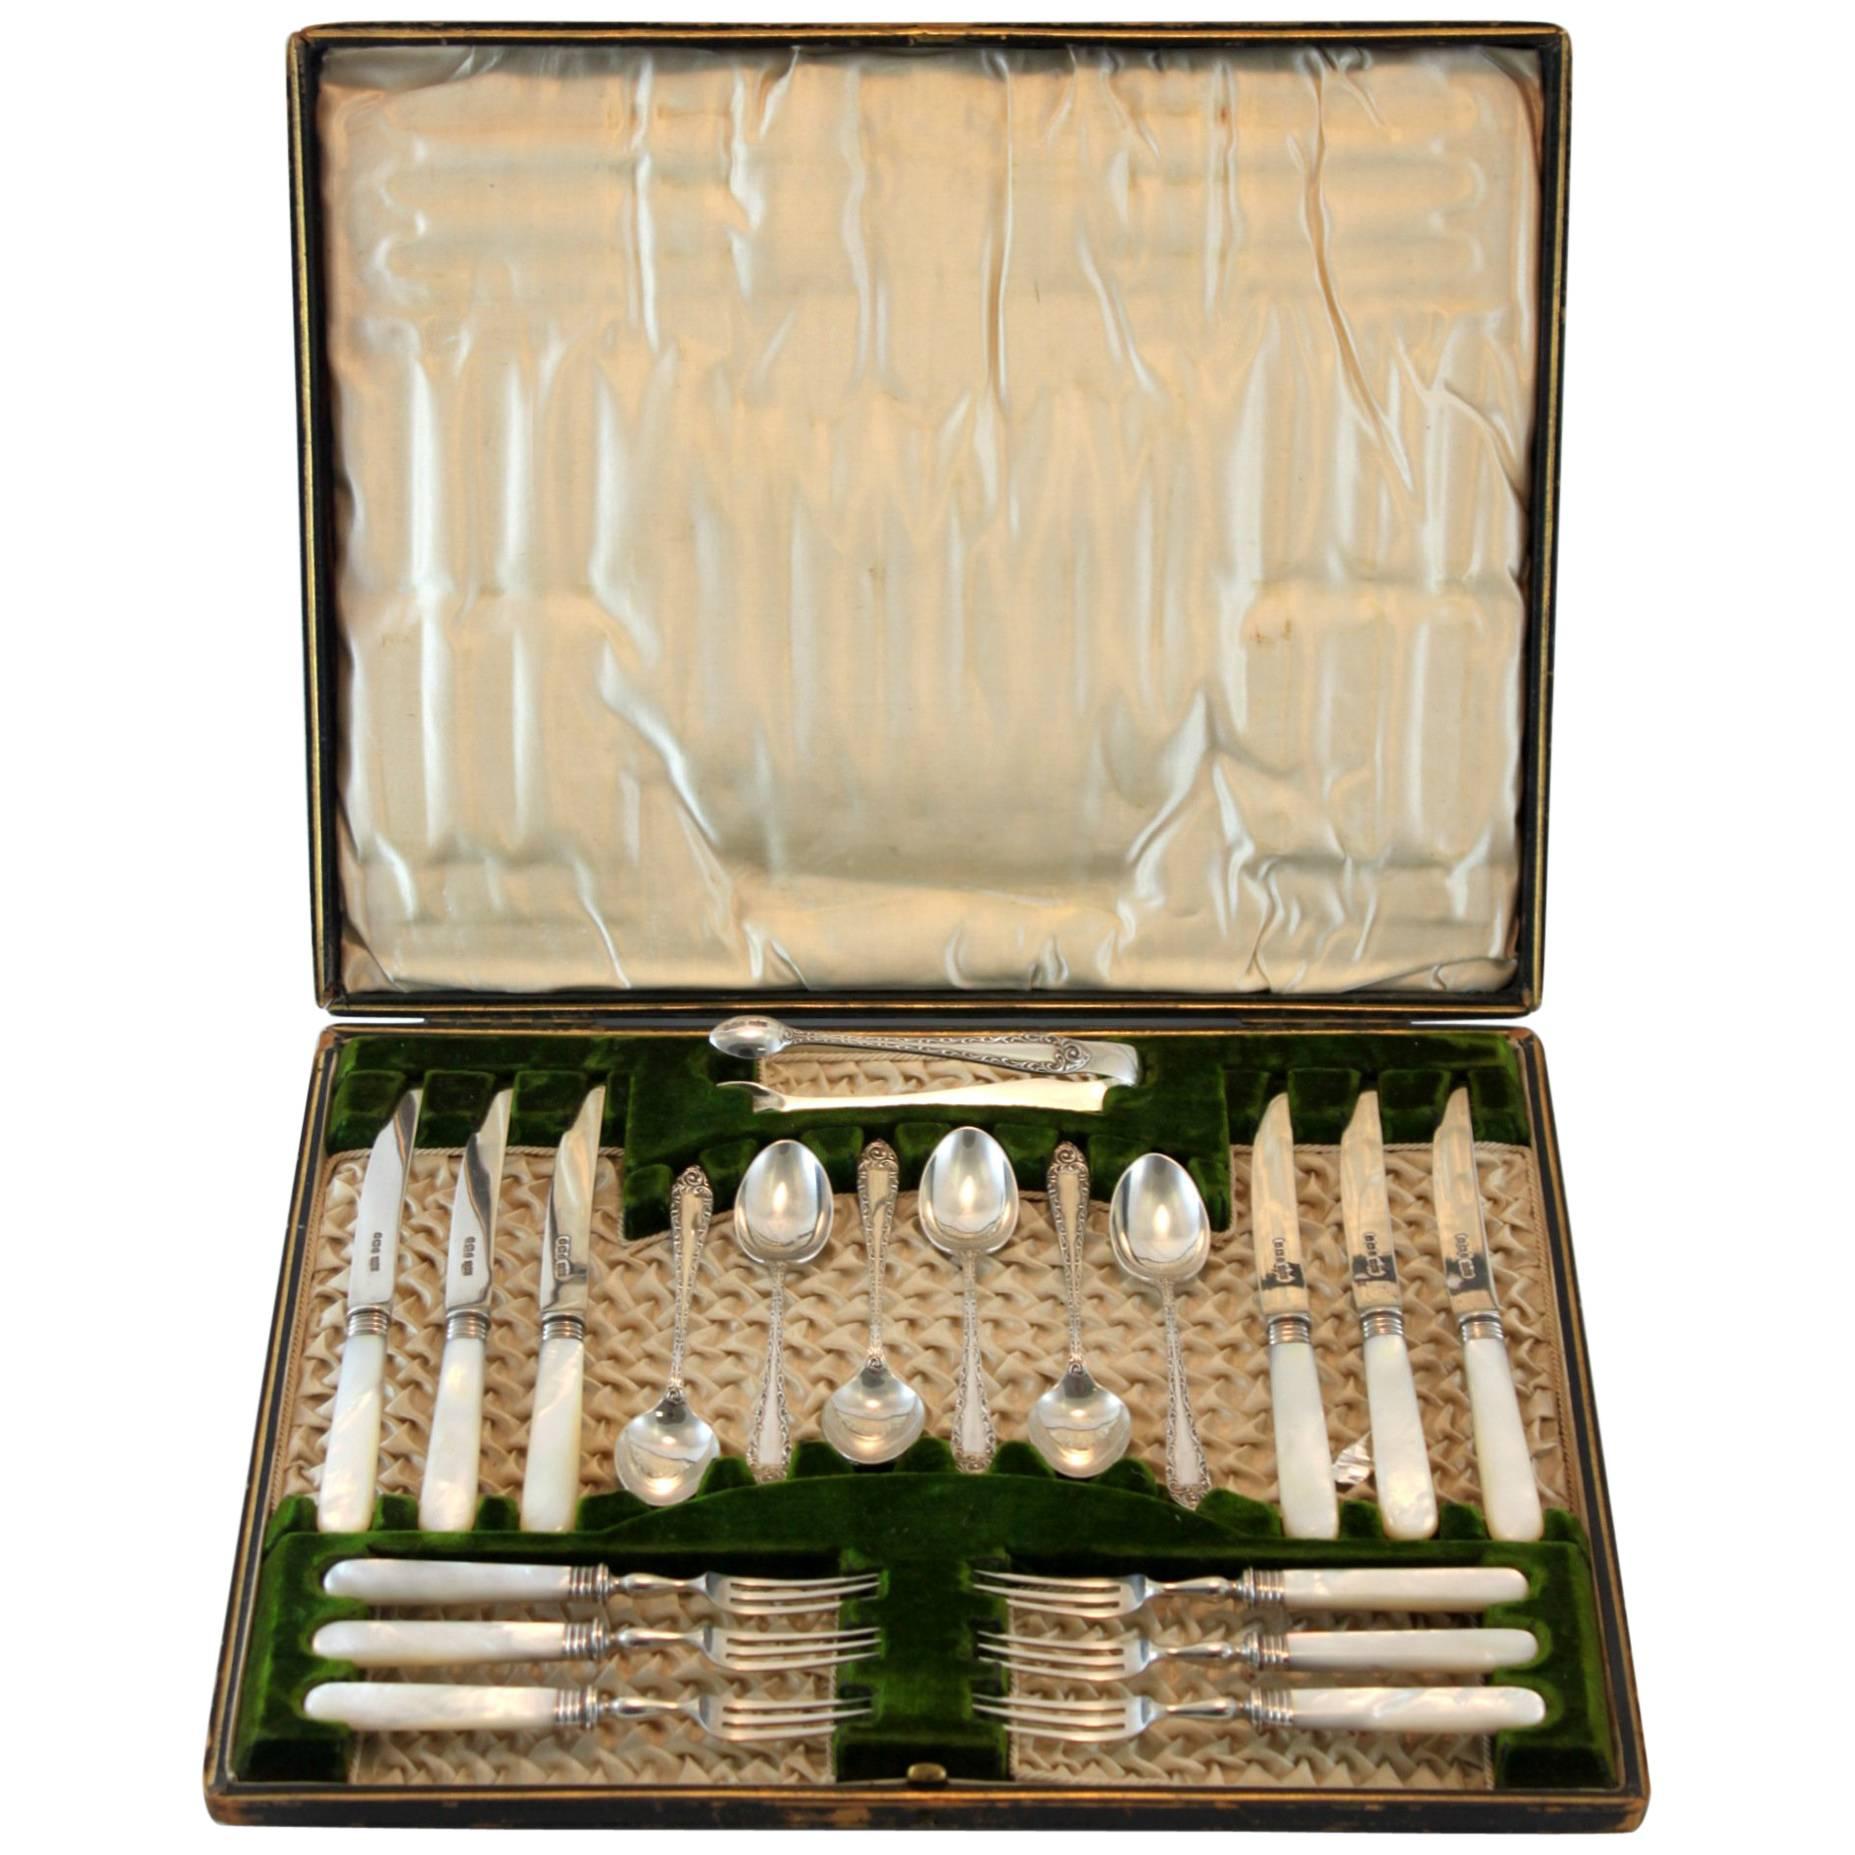 Silver and Mother-of-Pearl Tableware Set, James Dixon & Sons Ltd, Sheffield 1903